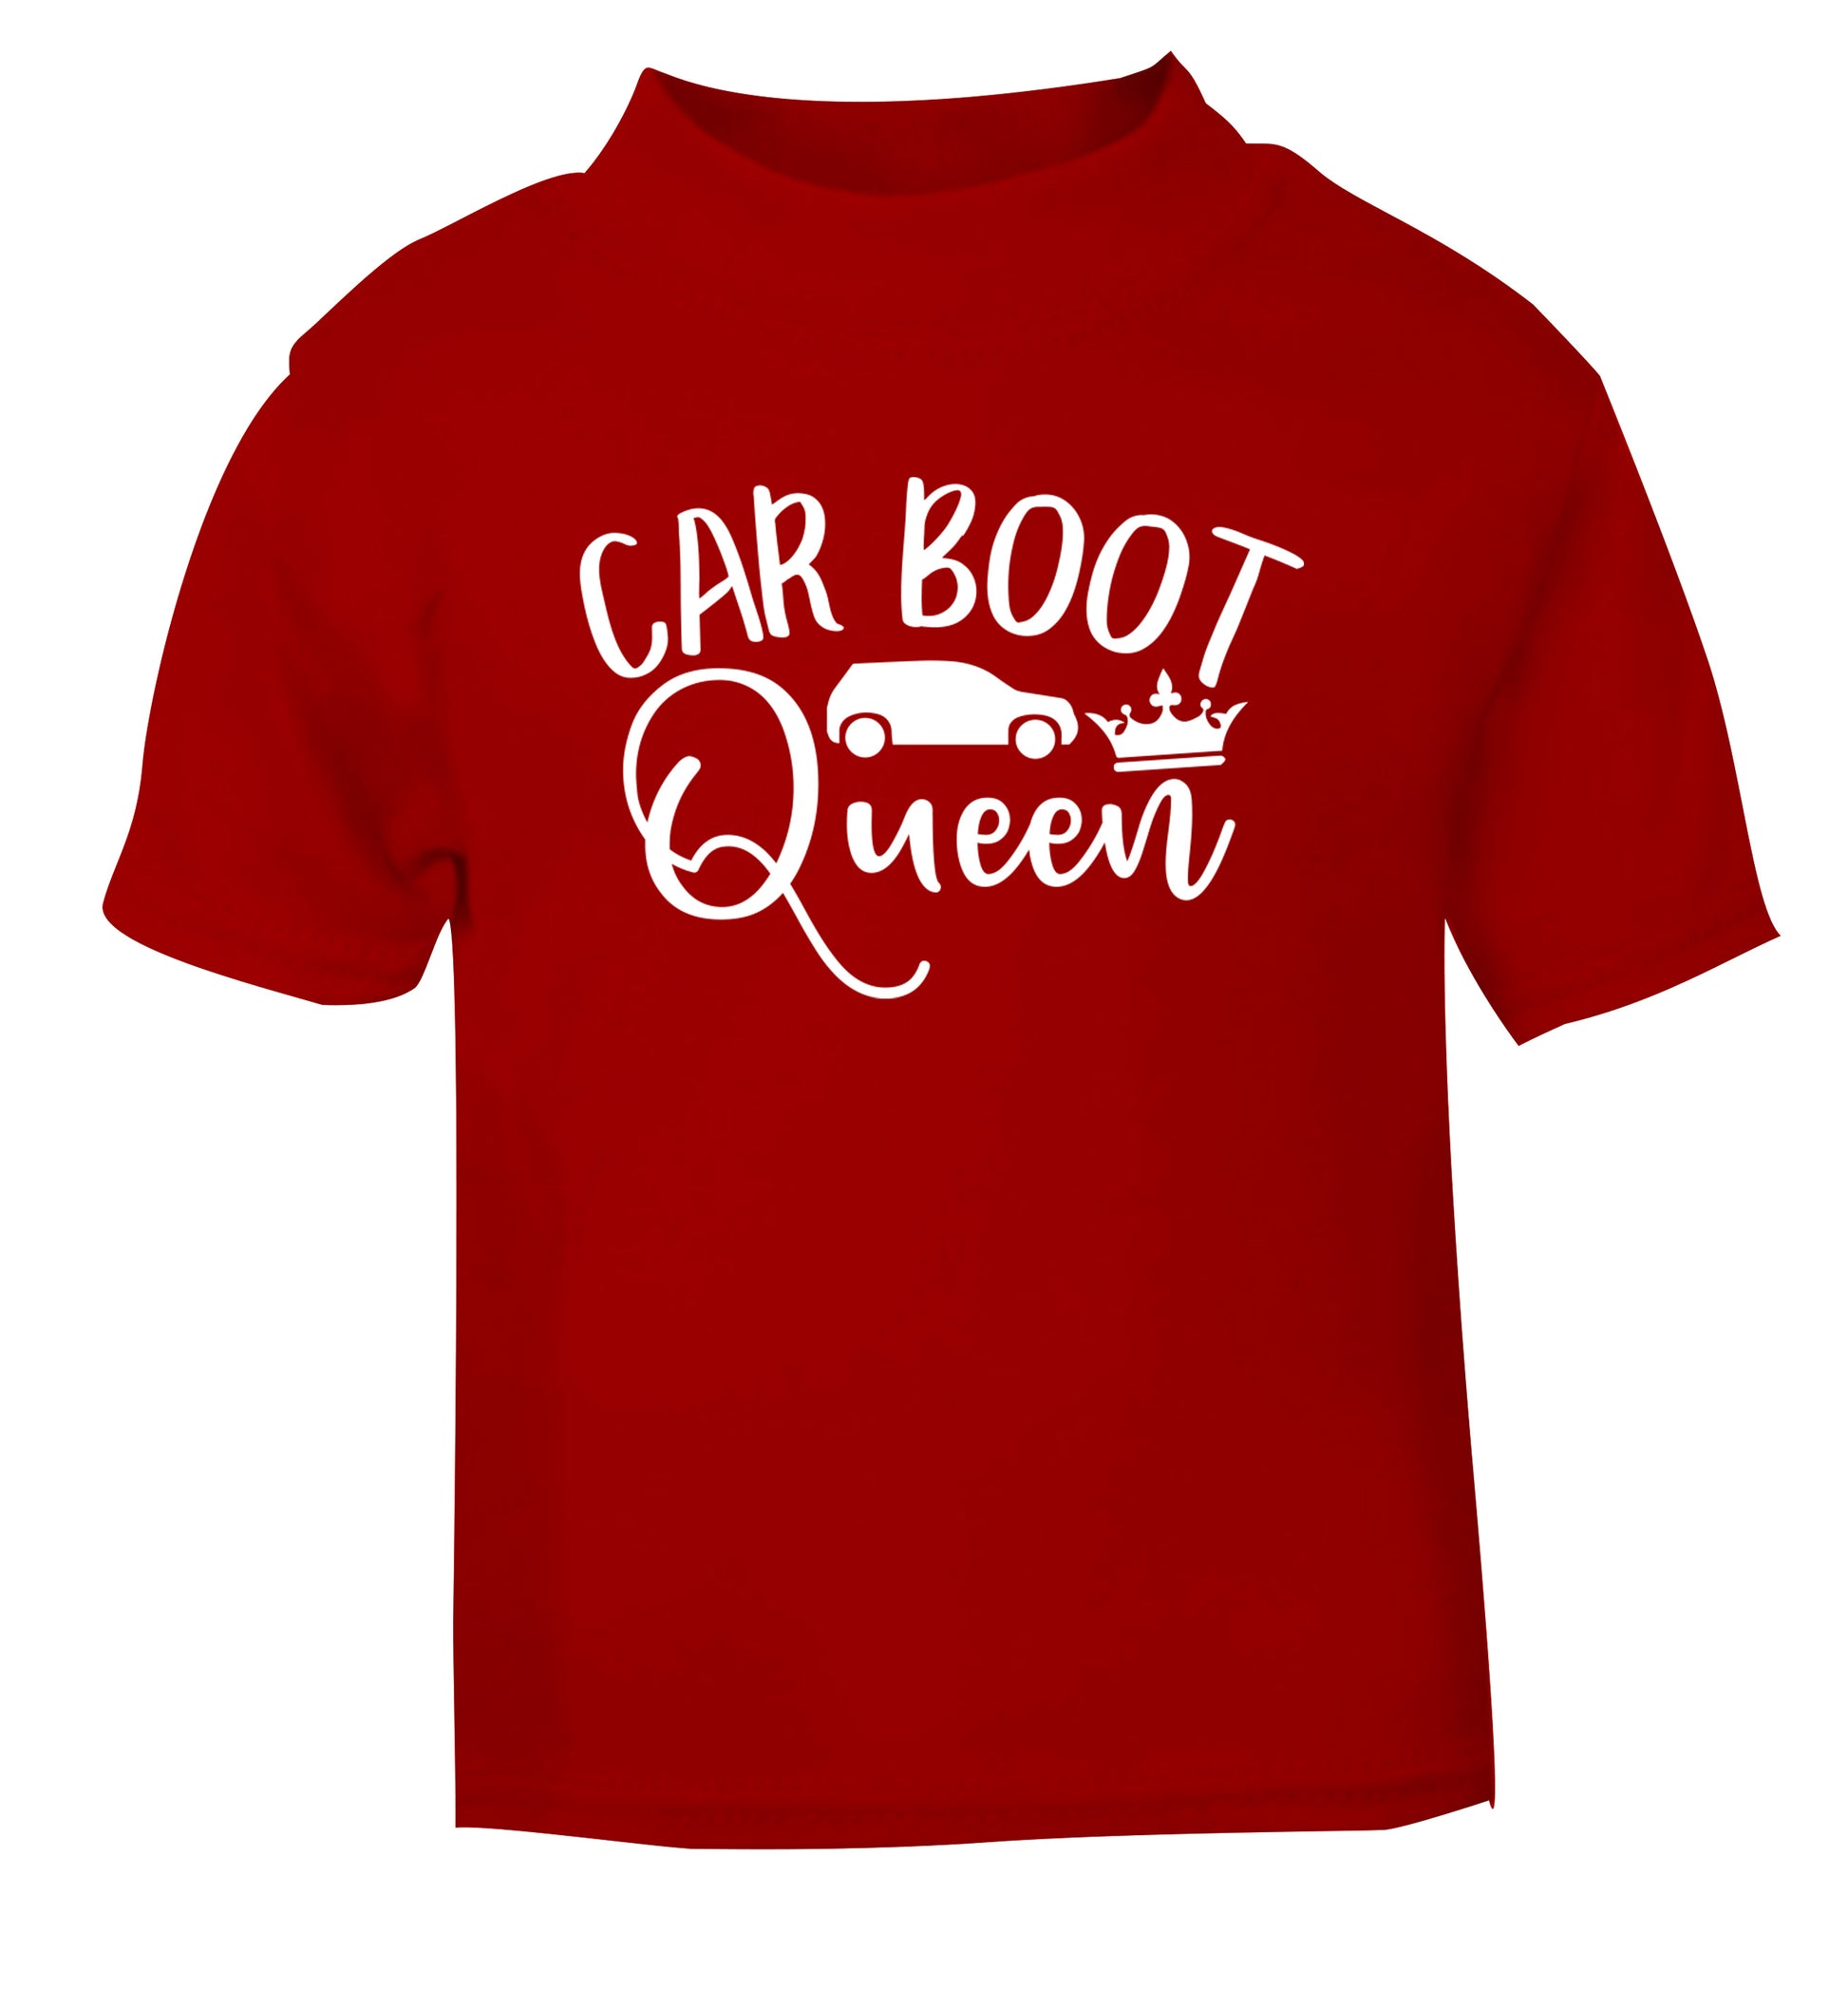 Carboot Queen red Baby Toddler Tshirt 2 Years